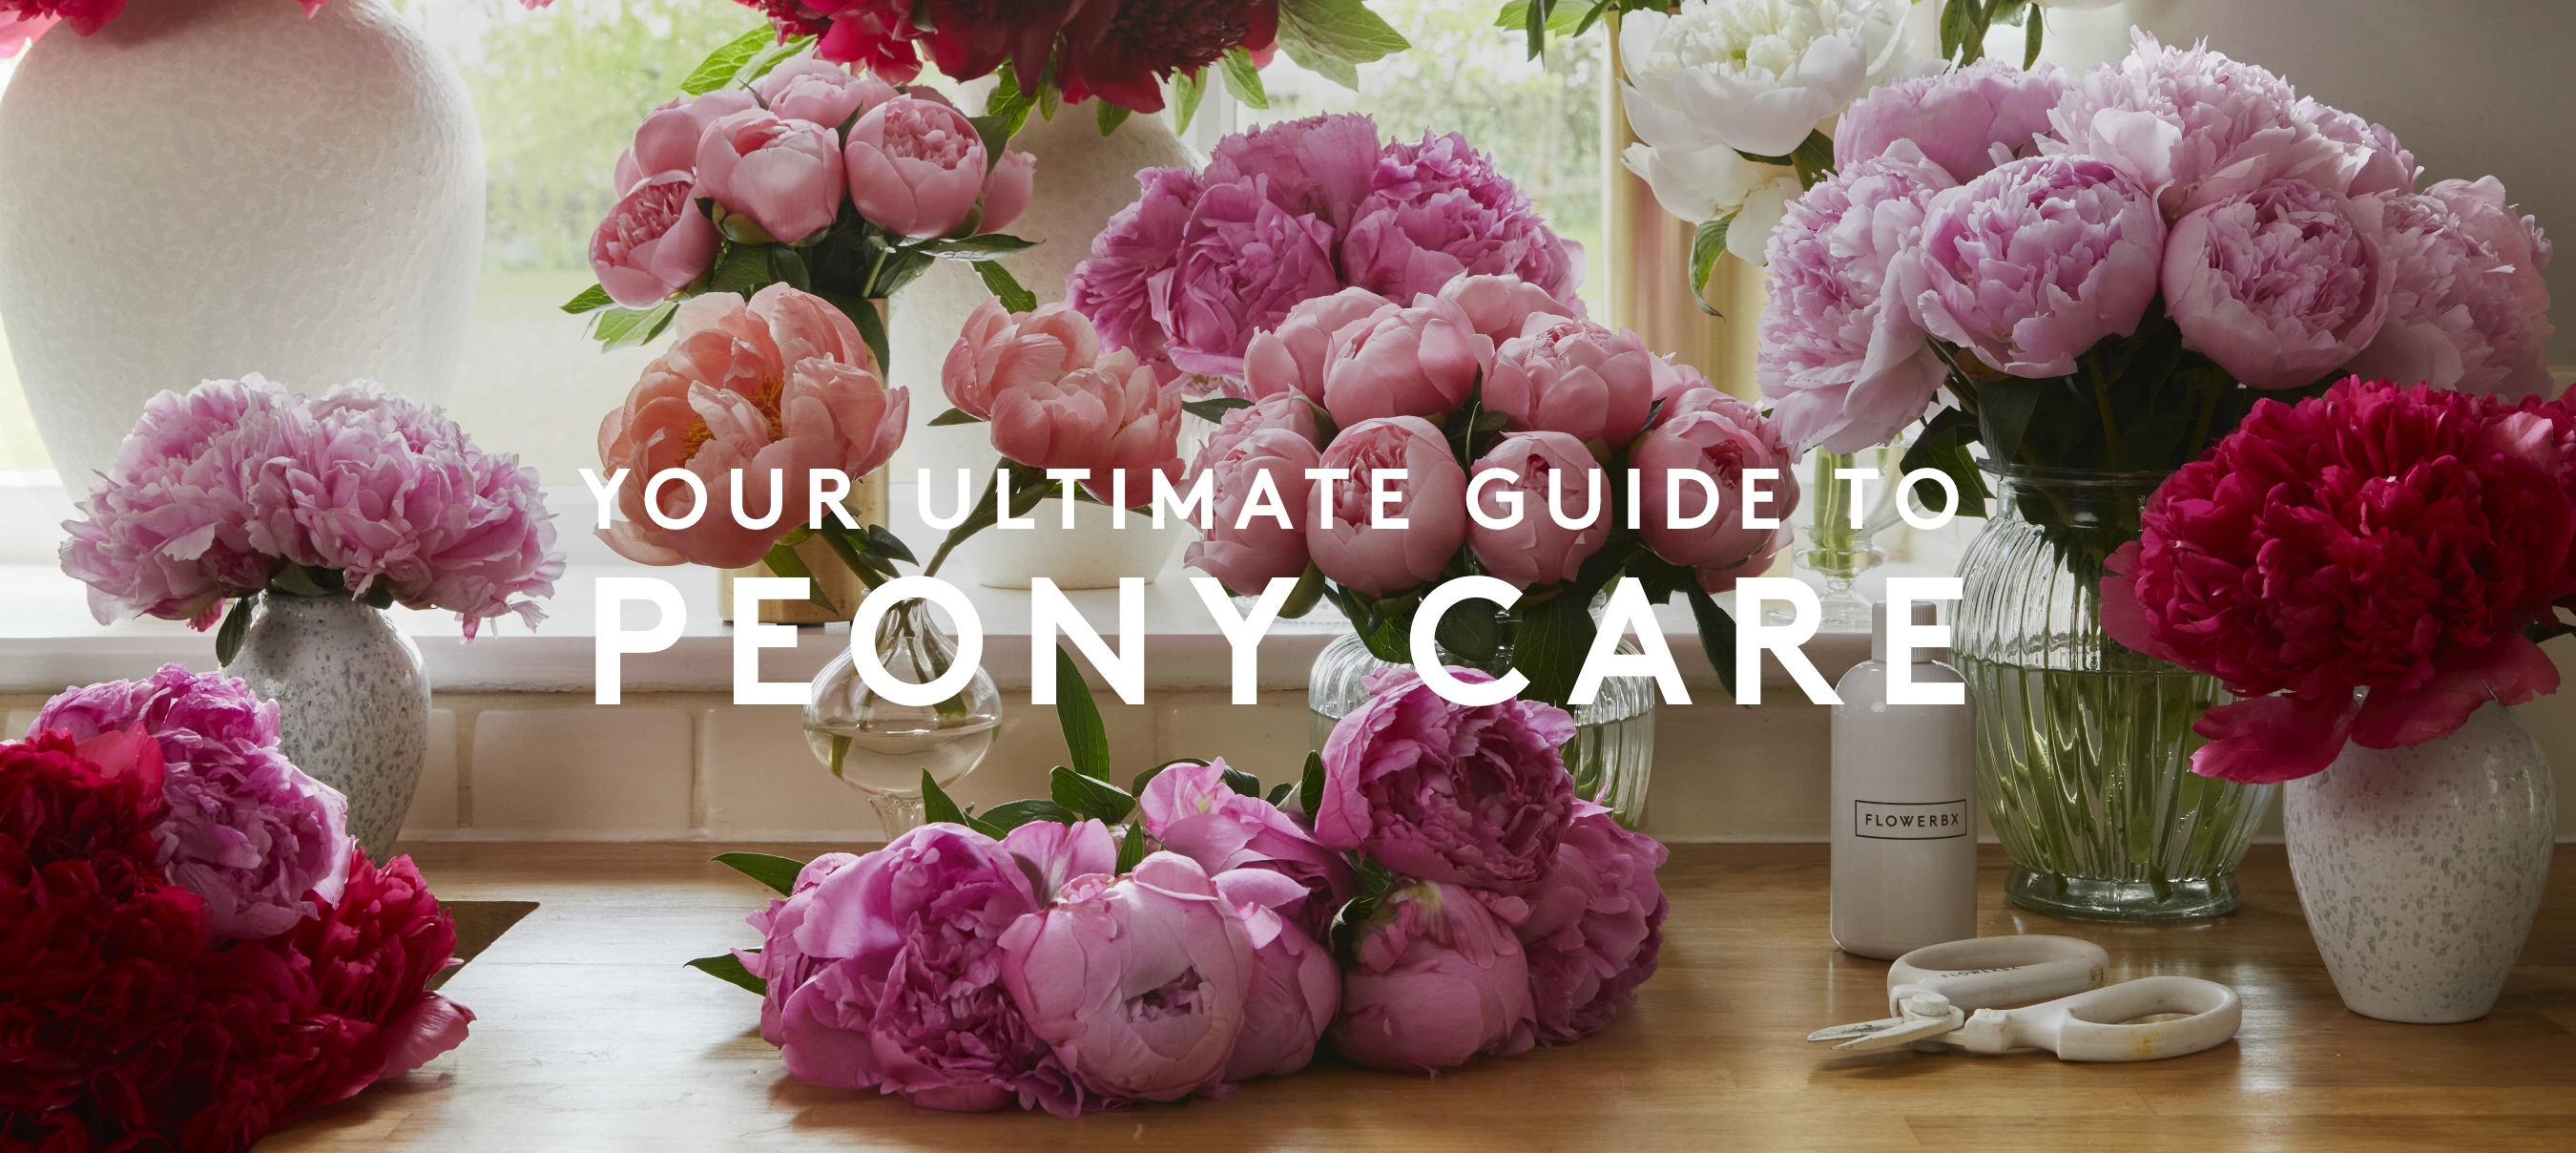 your ultimate guide to peony care